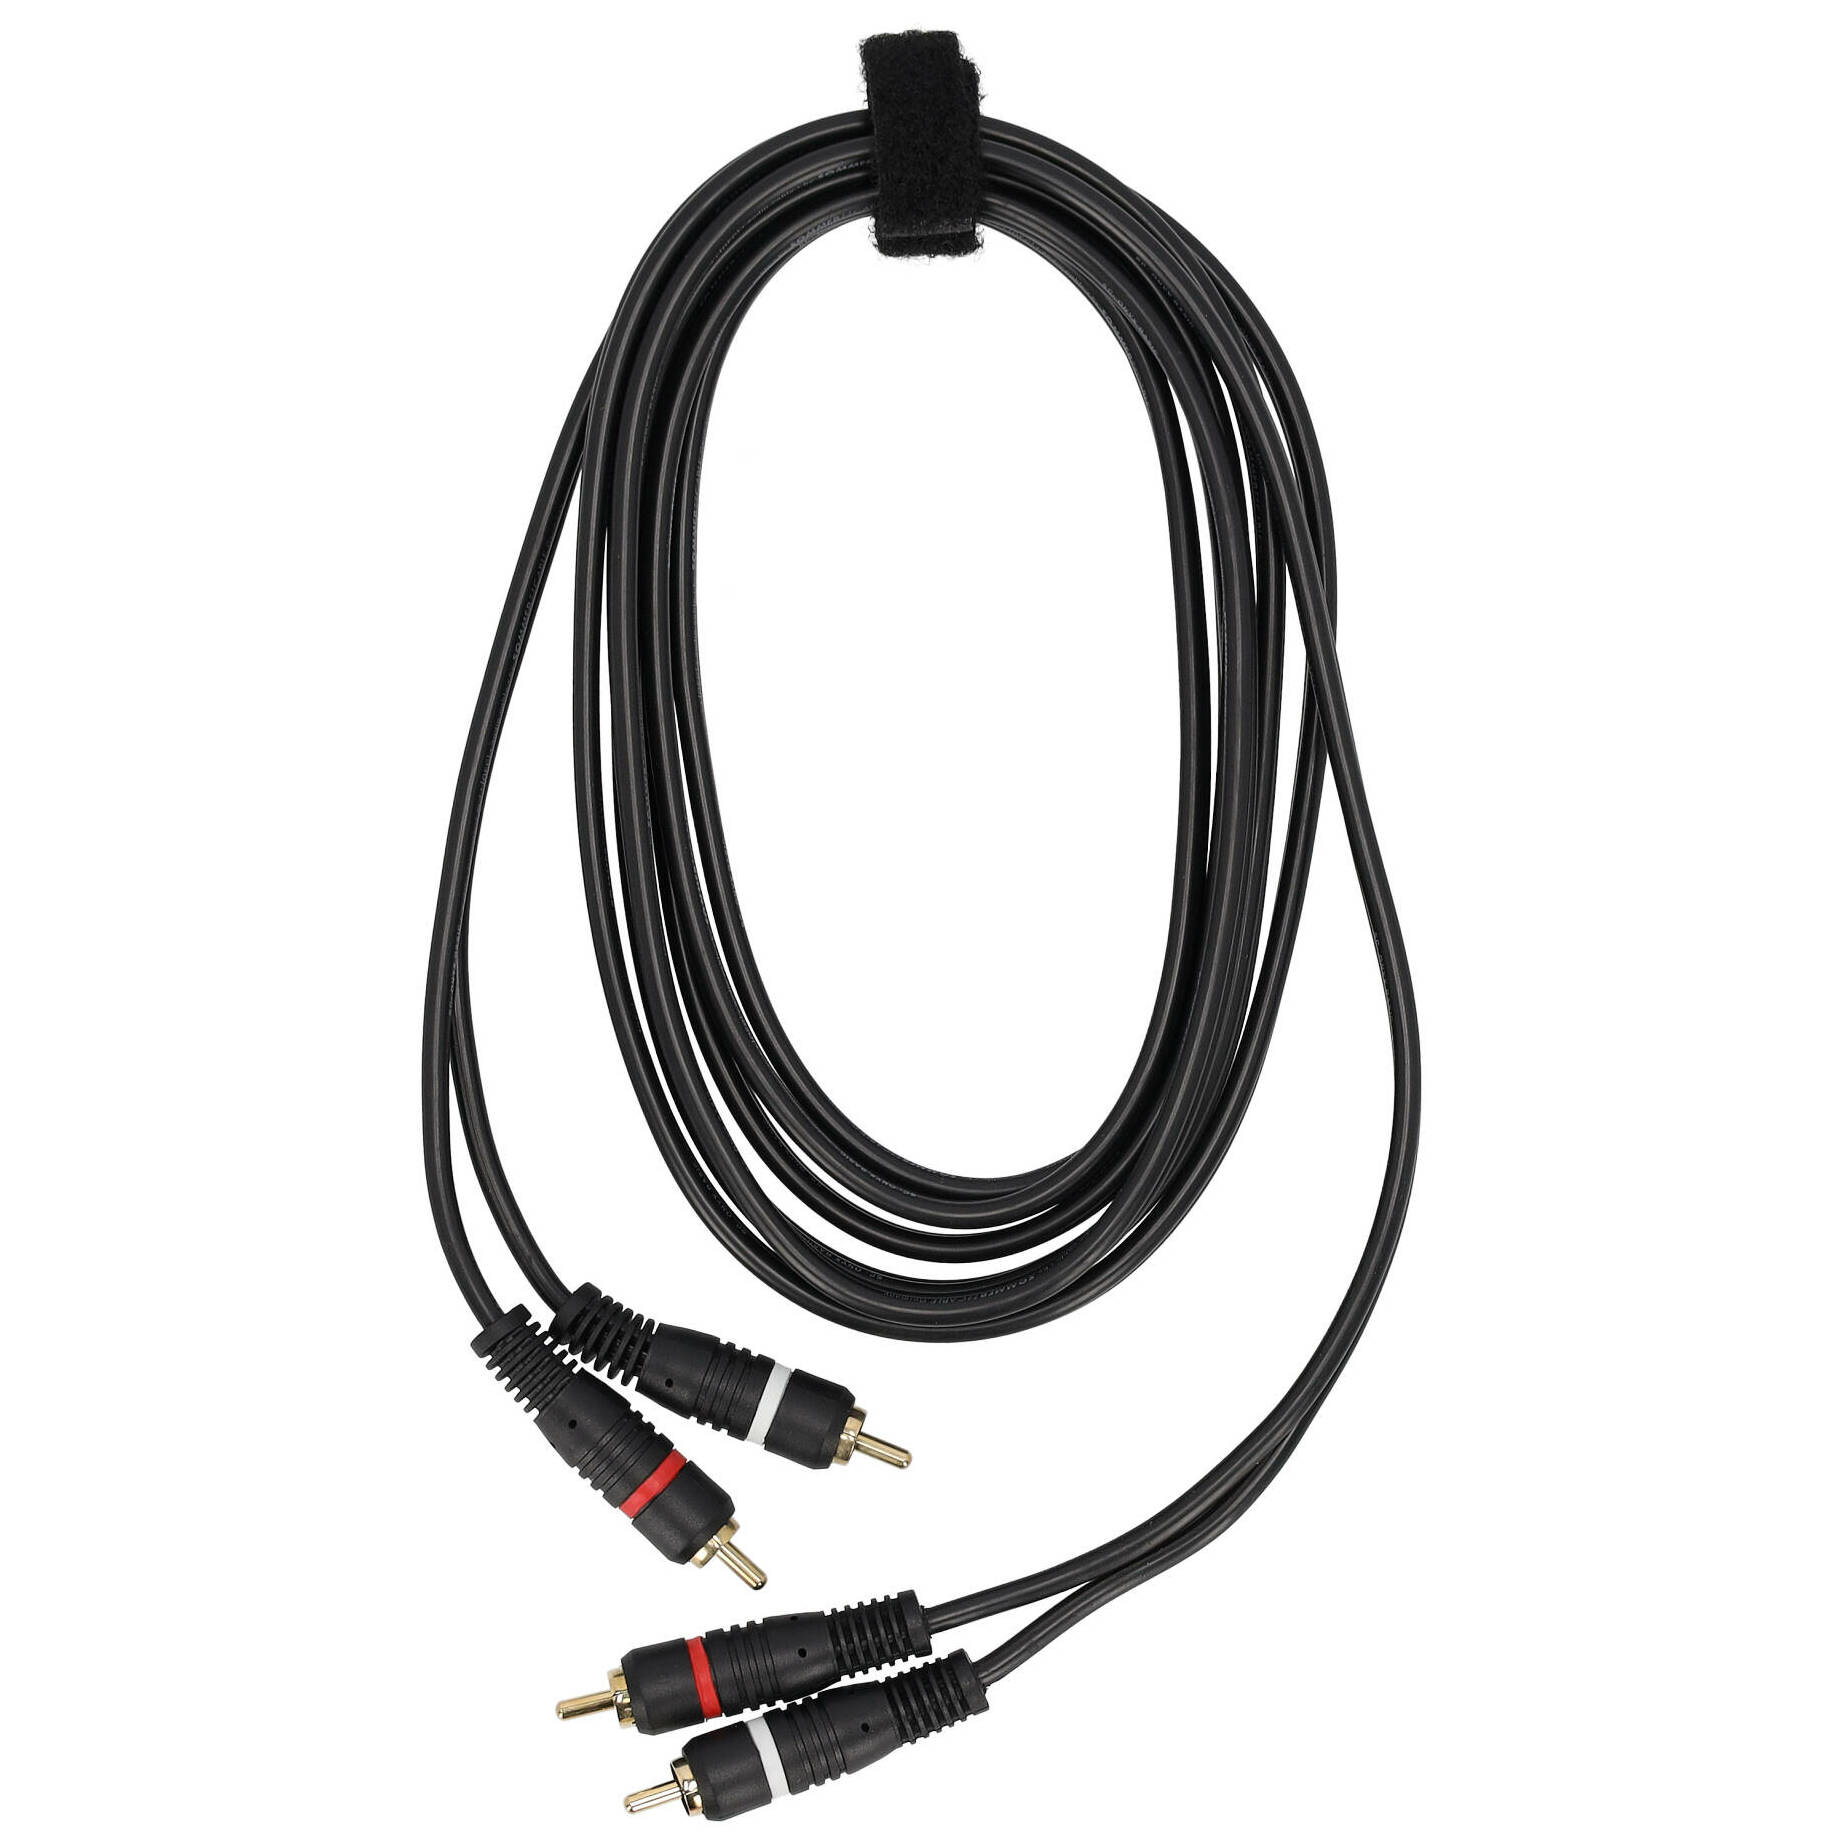 Sommer Cable BV-CICI-0300 SC-Onyx Basic 2 x Cinch Male - 2 x Cinch Male 3 Meter